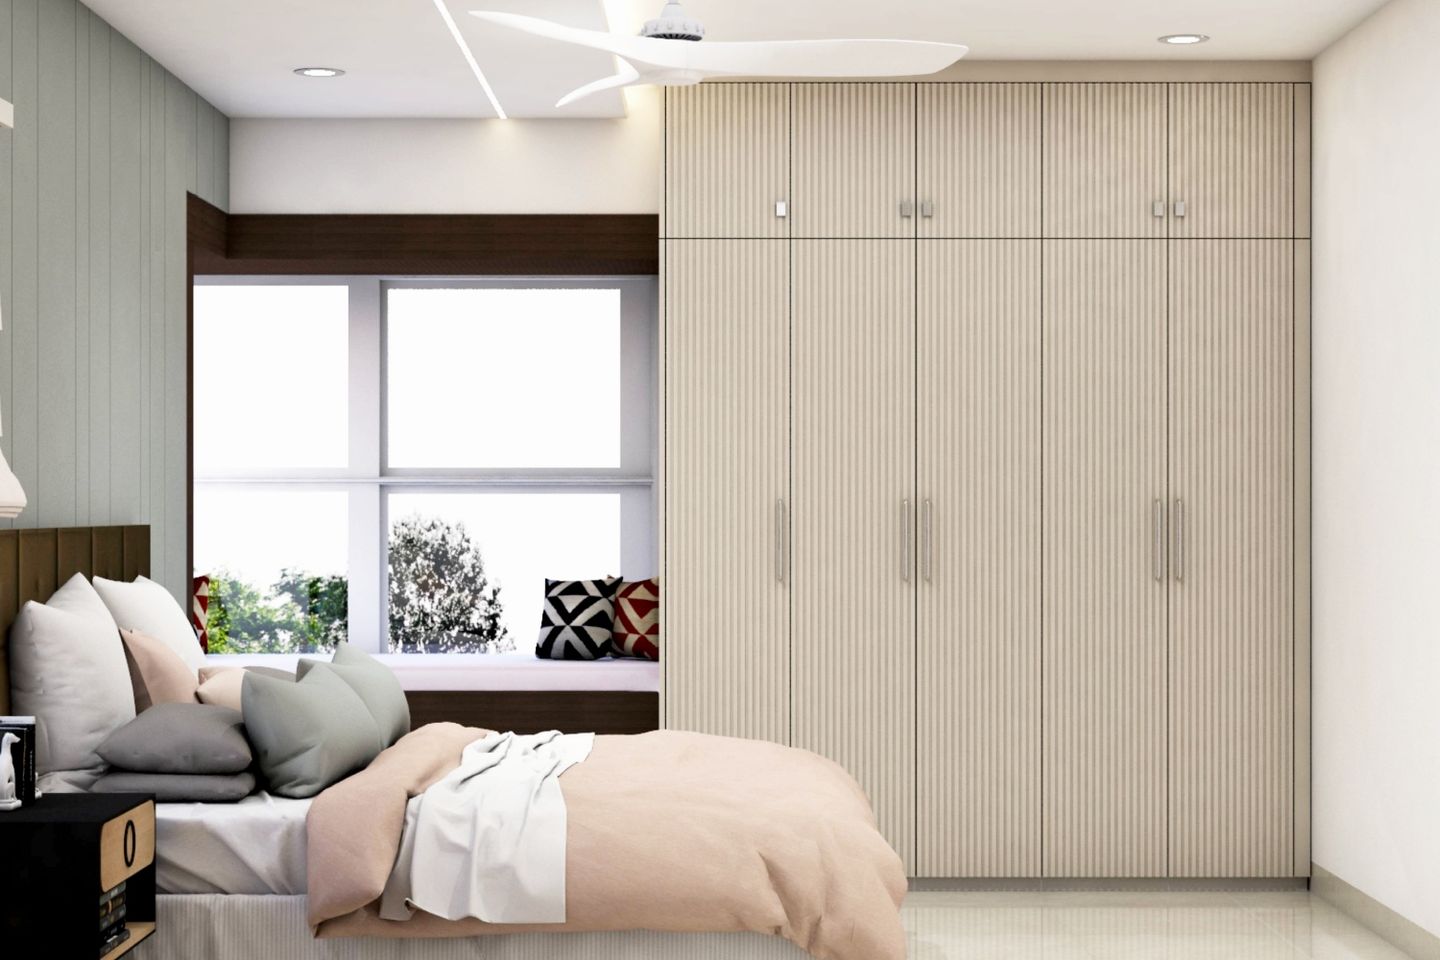 Contemporary Pumice Grey Wardrobe with Suede Finish - Livspace